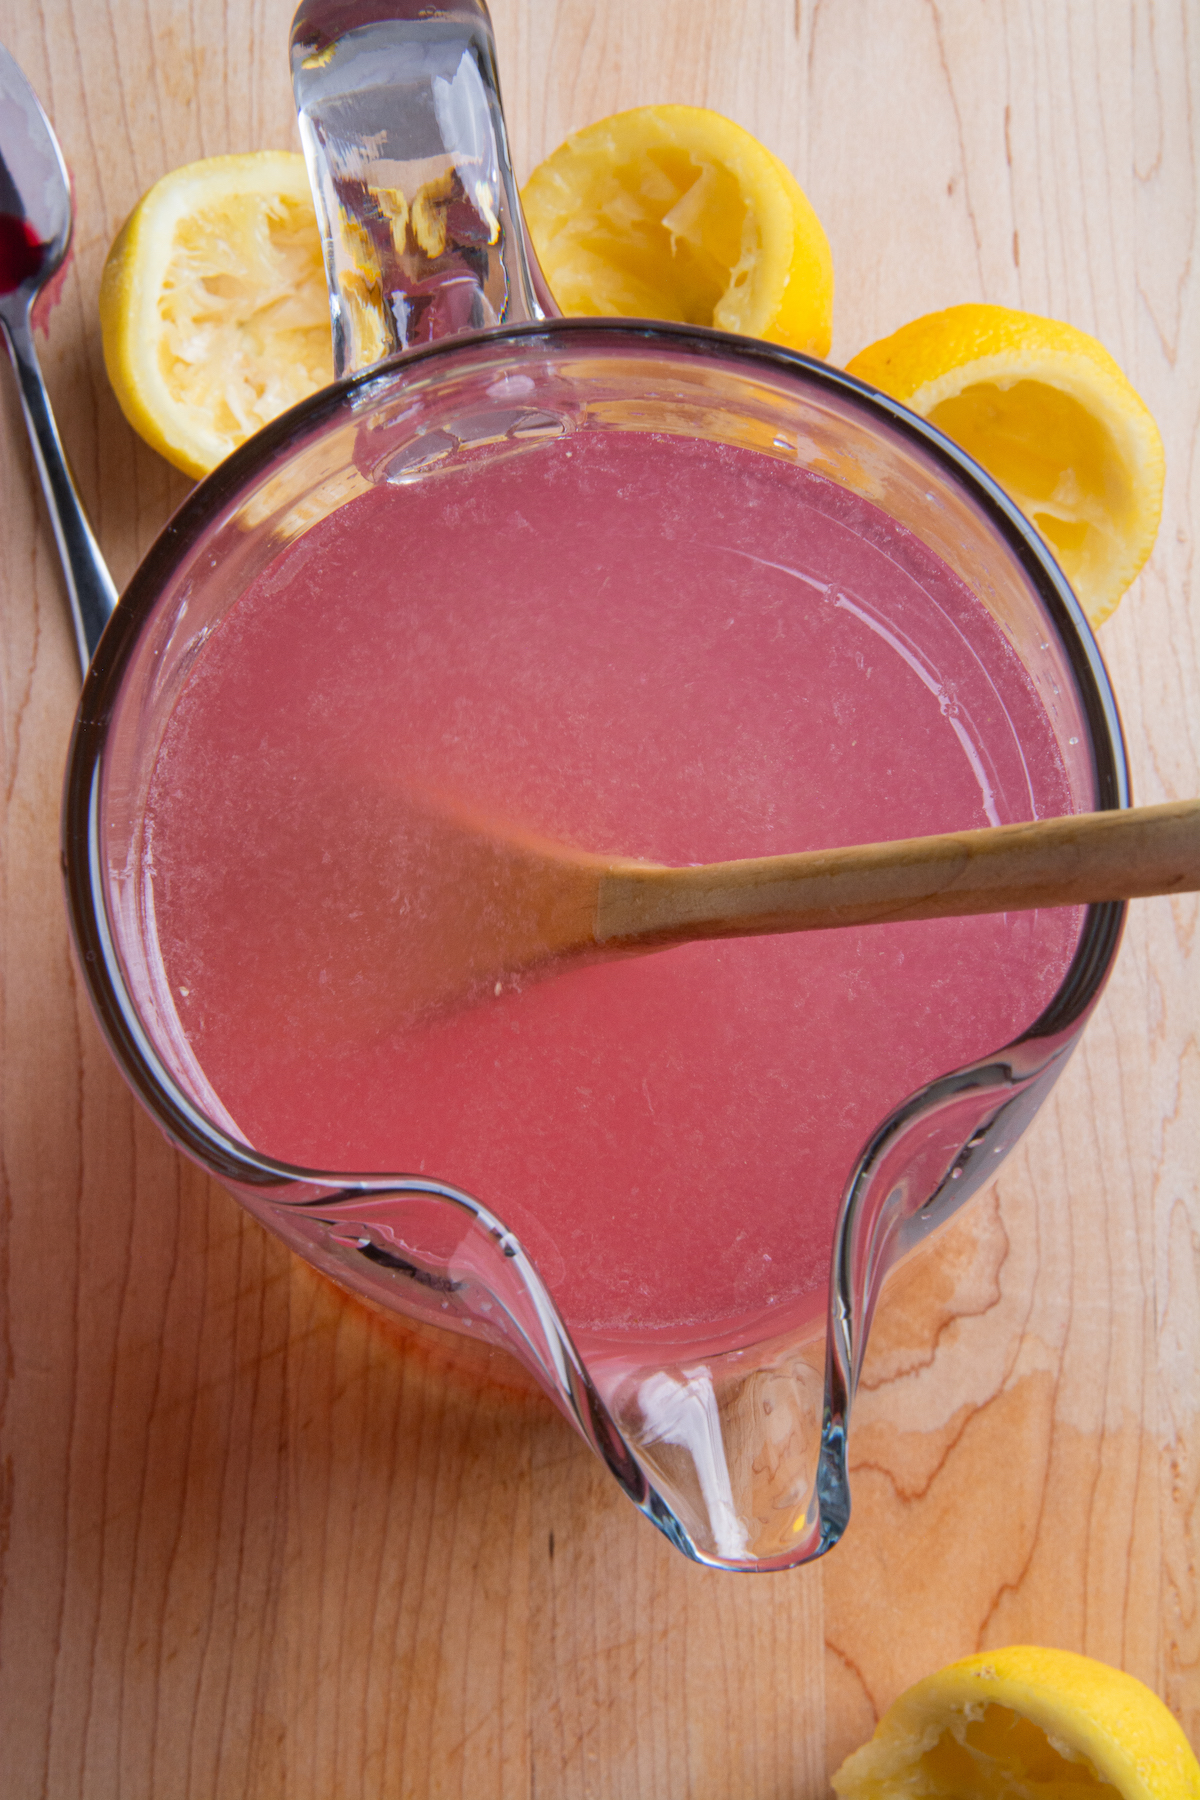 Above a pitcher of pink lemonade with a wooden spoon inside to stir it and squeezed lemons at the bottom around it.